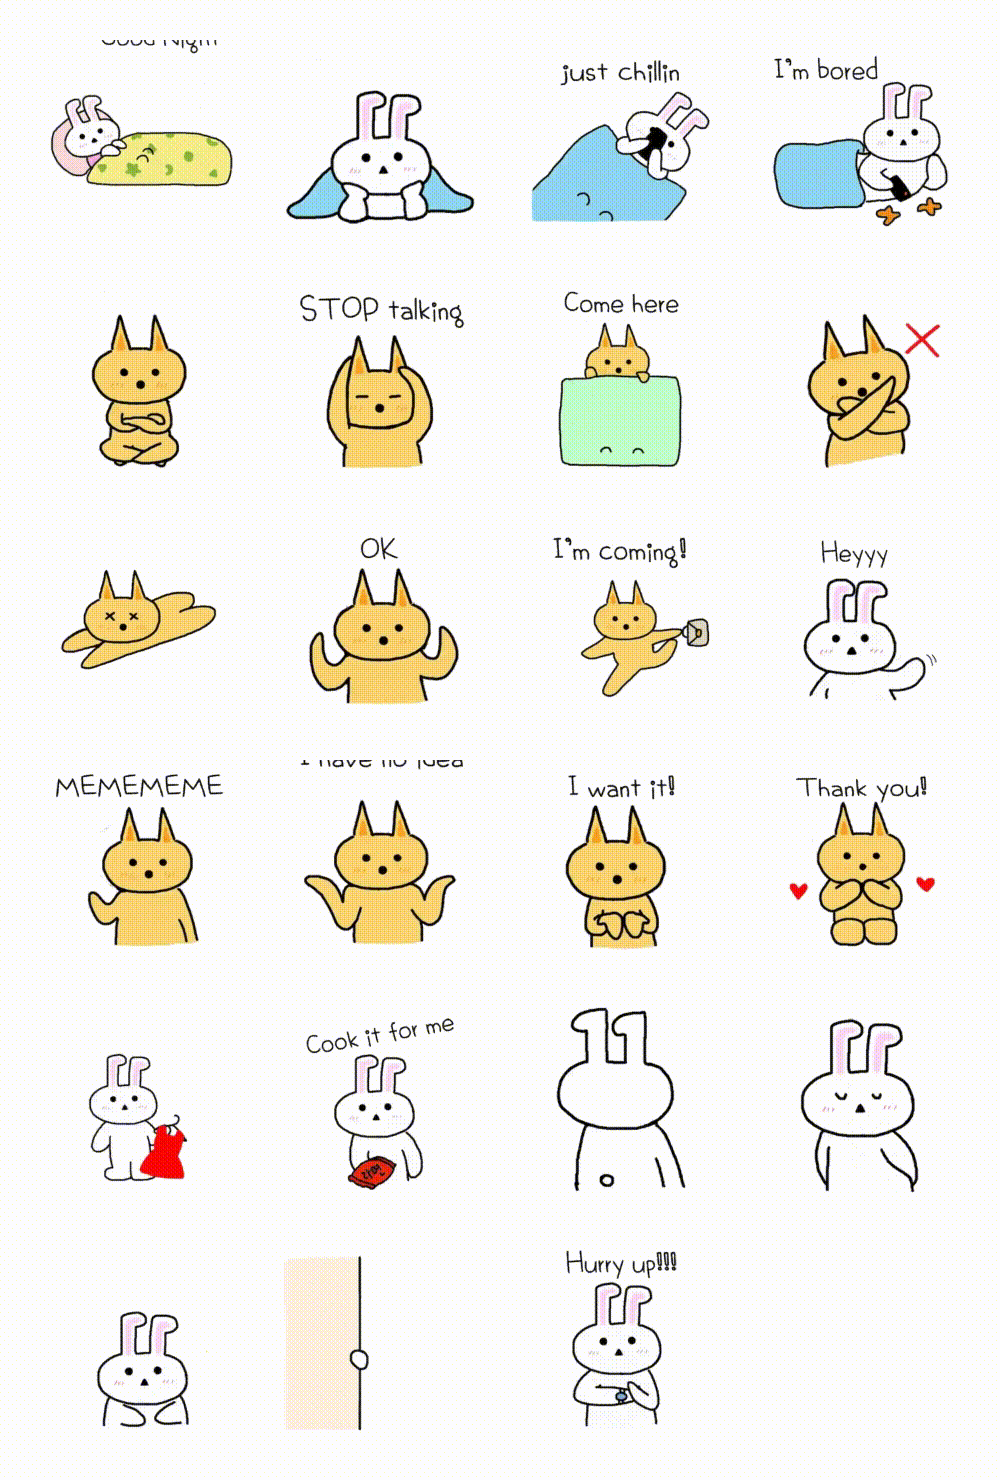 Cat and Rabbit Animals sticker pack for Whatsapp, Telegram, Signal, and others chatting and message apps